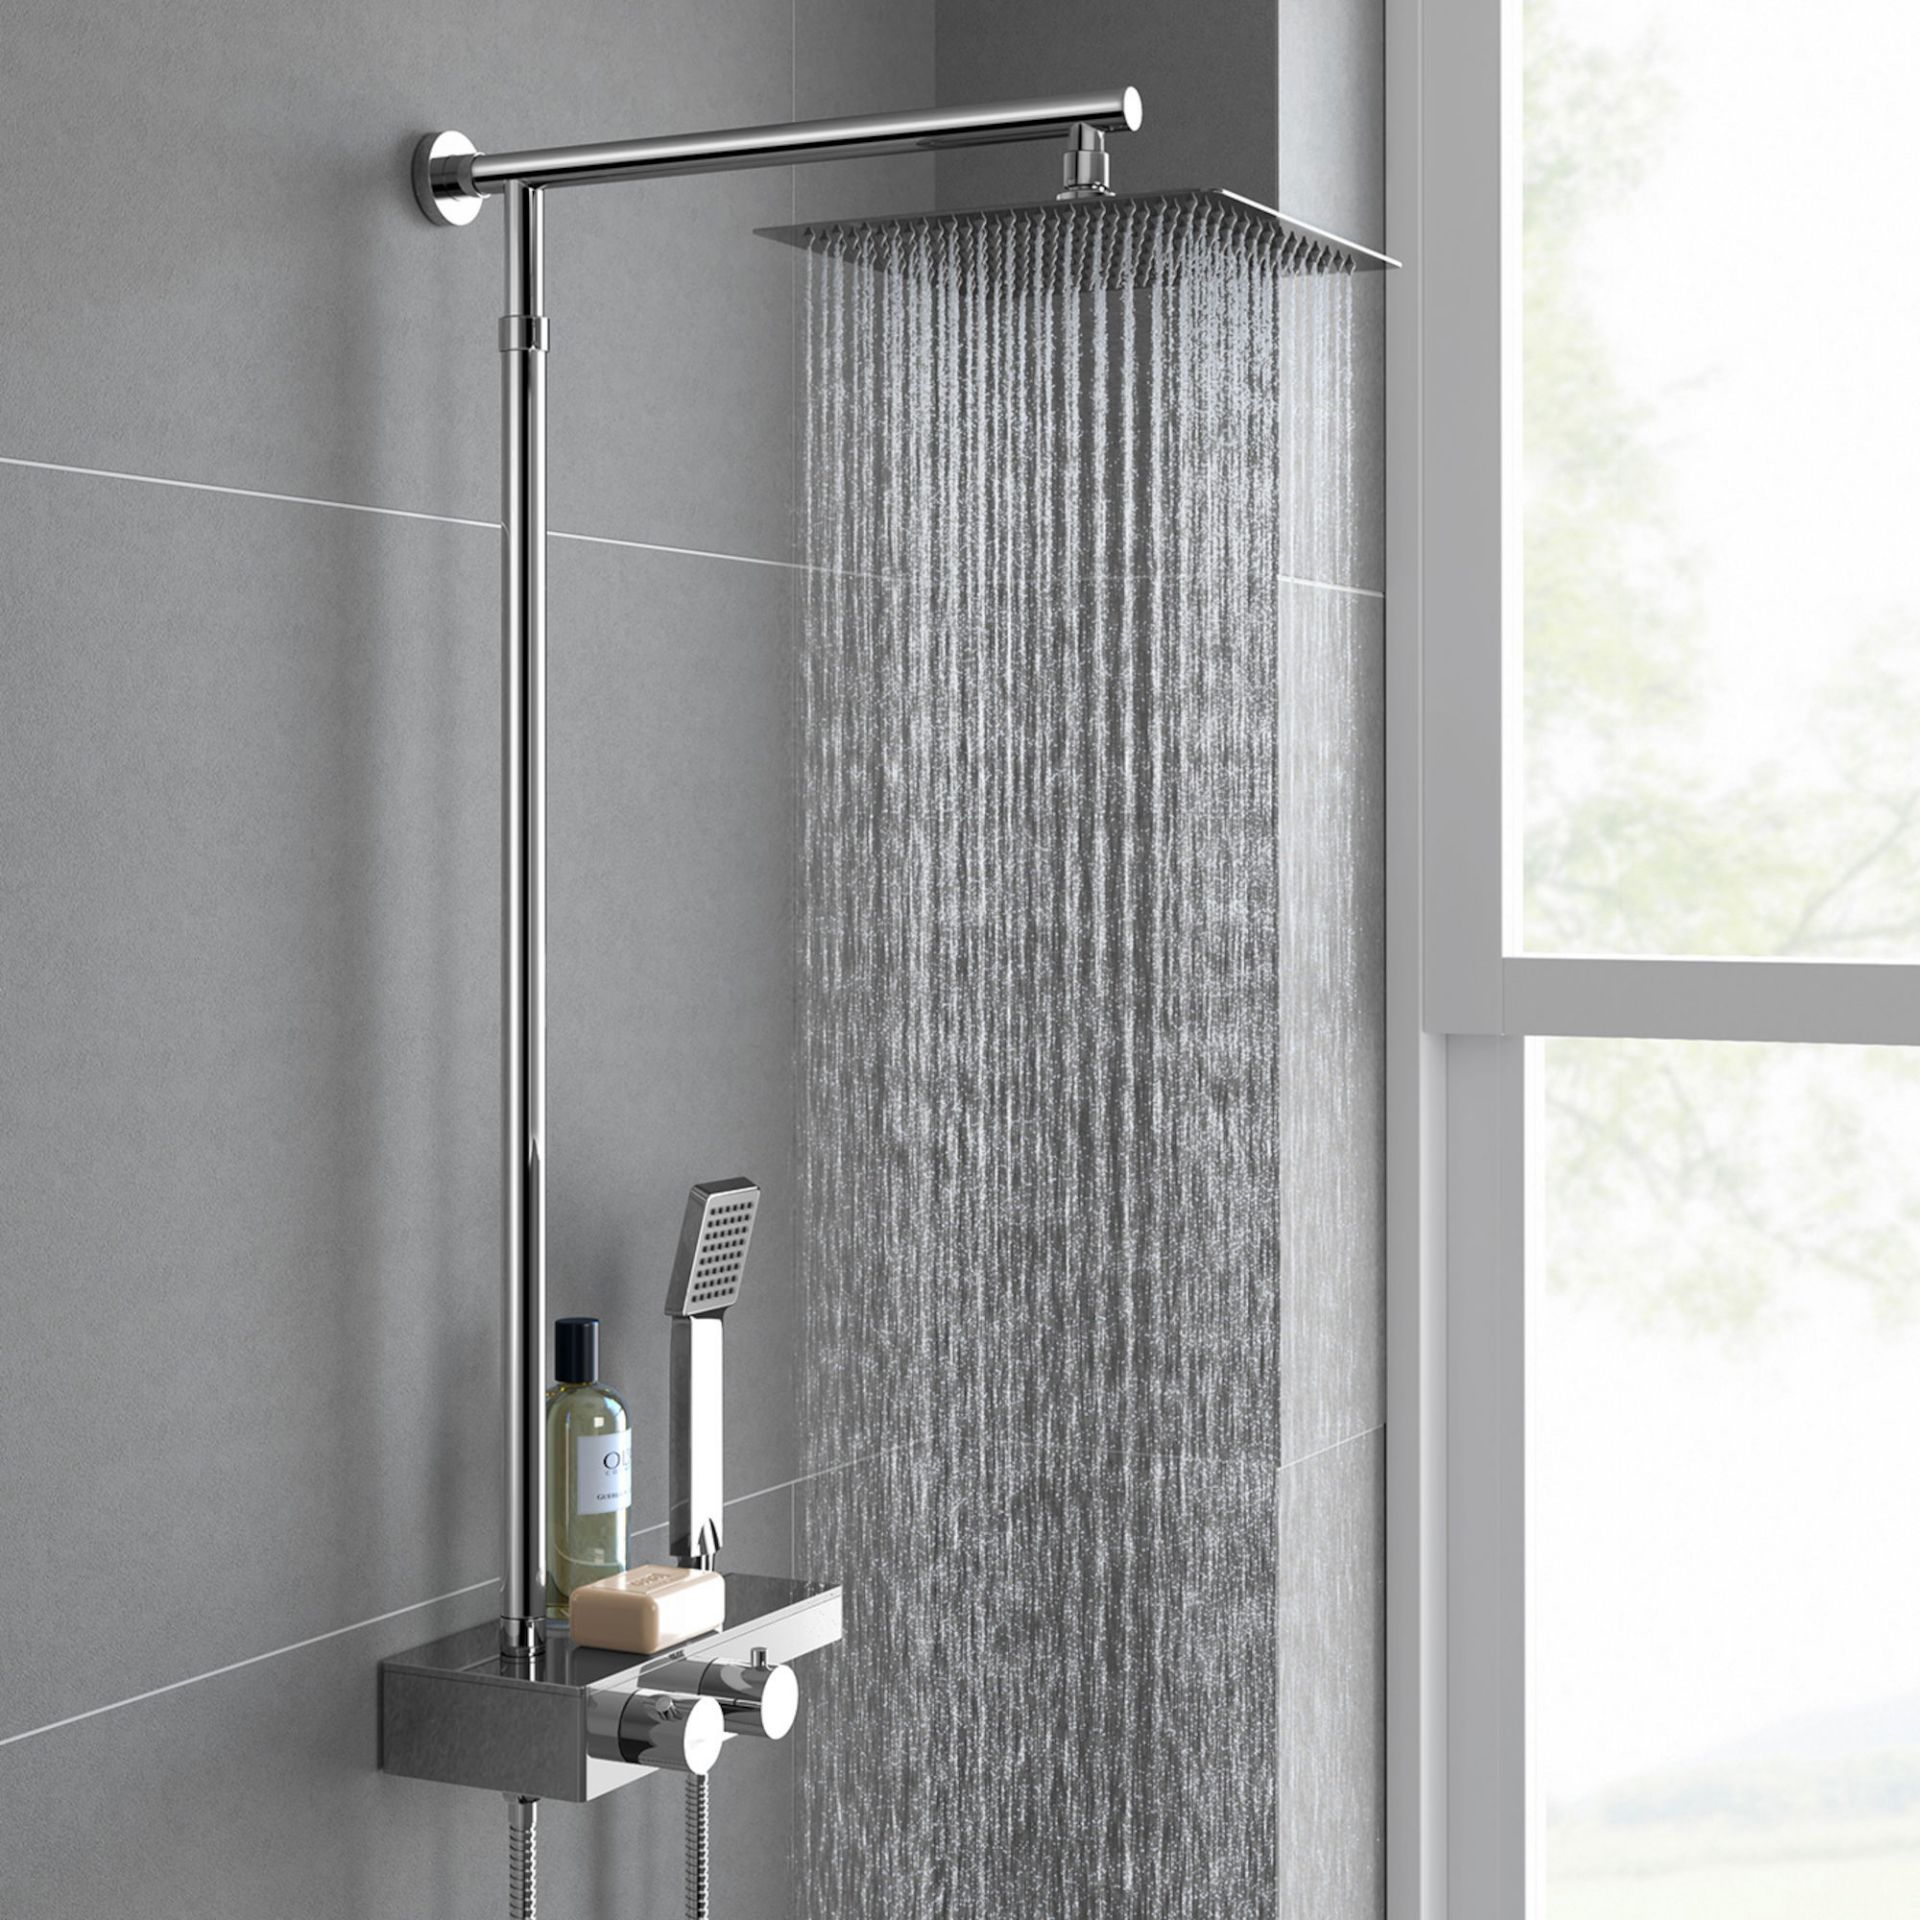 (RK58) Square Exposed Thermostatic Shower Shelf, Kit & Large Head. RRP £349.99. Style meets fu...